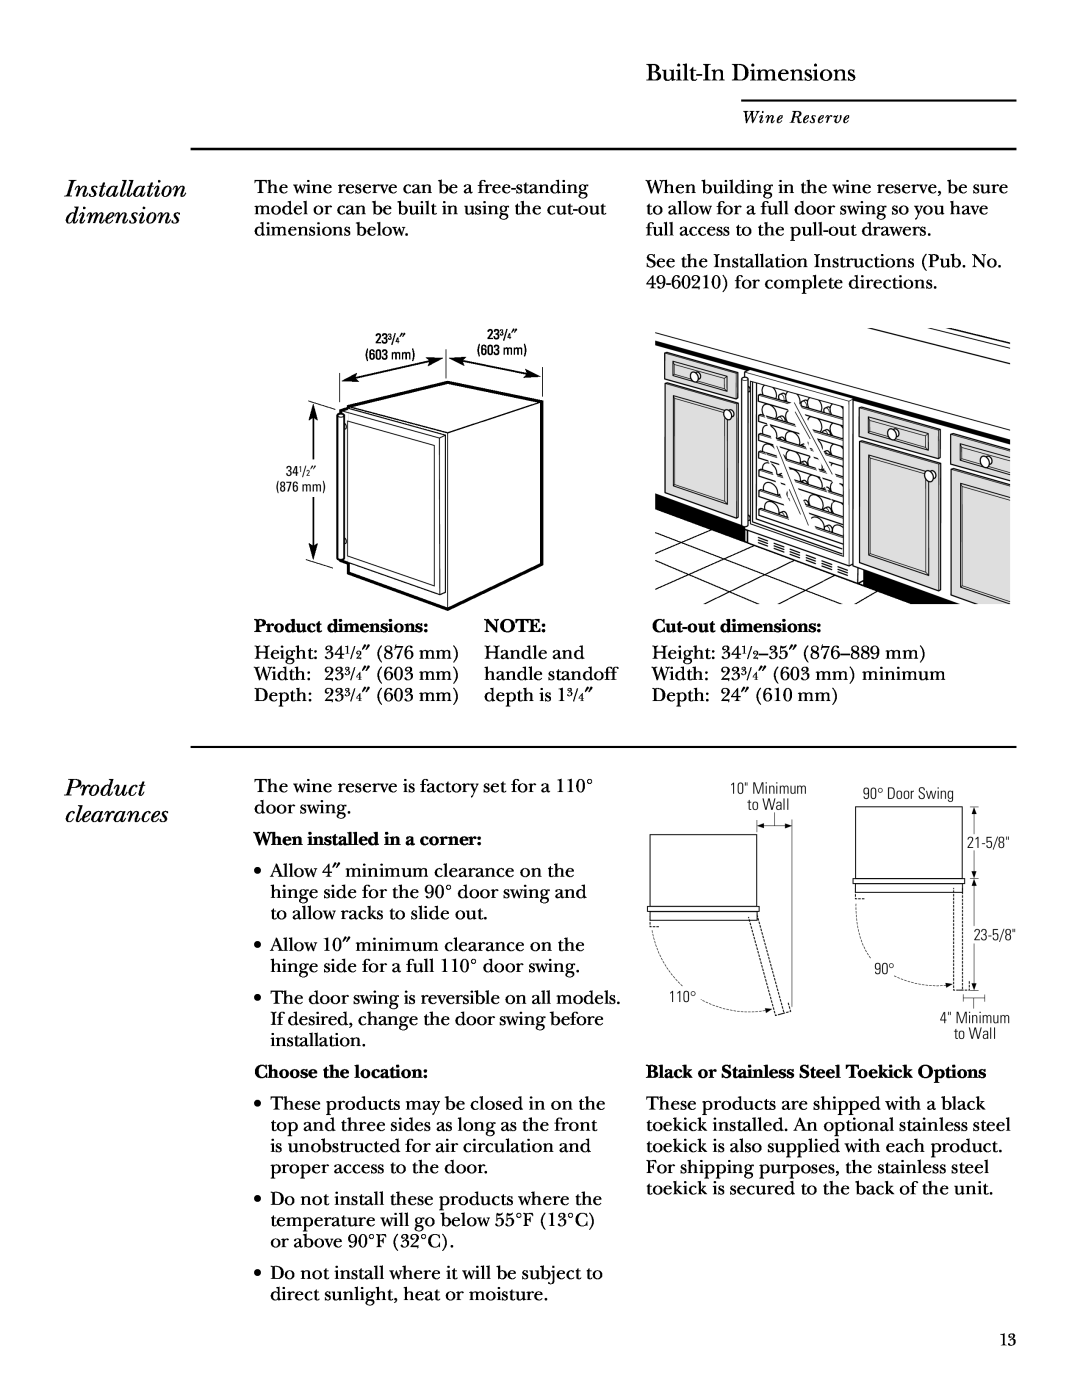 GE ZDWR240 owner manual Installation dimensions, Built-In Dimensions, Product clearances 